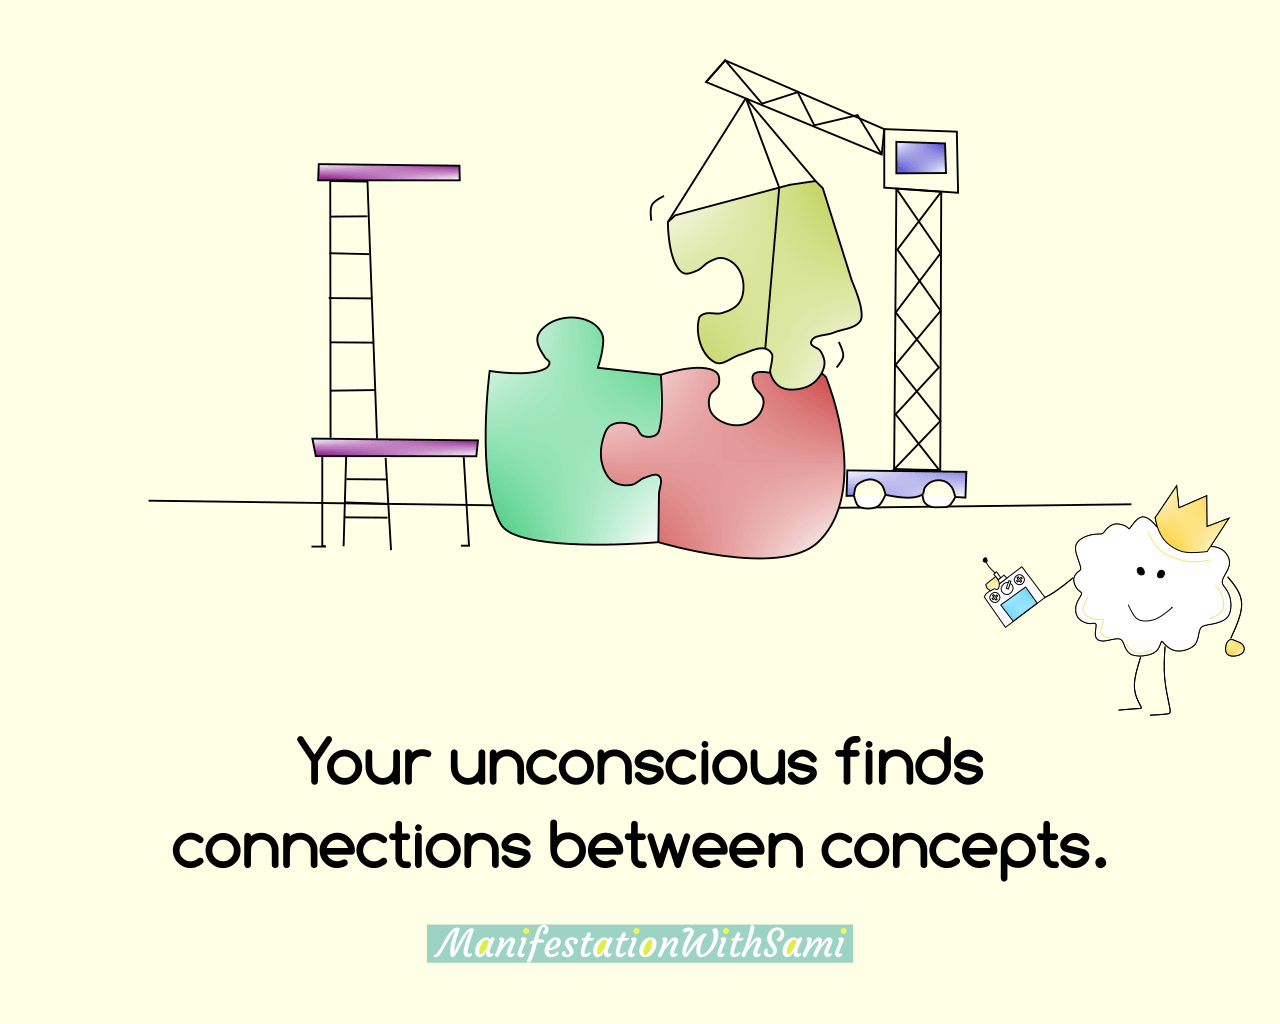 The power of your subconscious mind is that it finds connections between concepts in your mind.